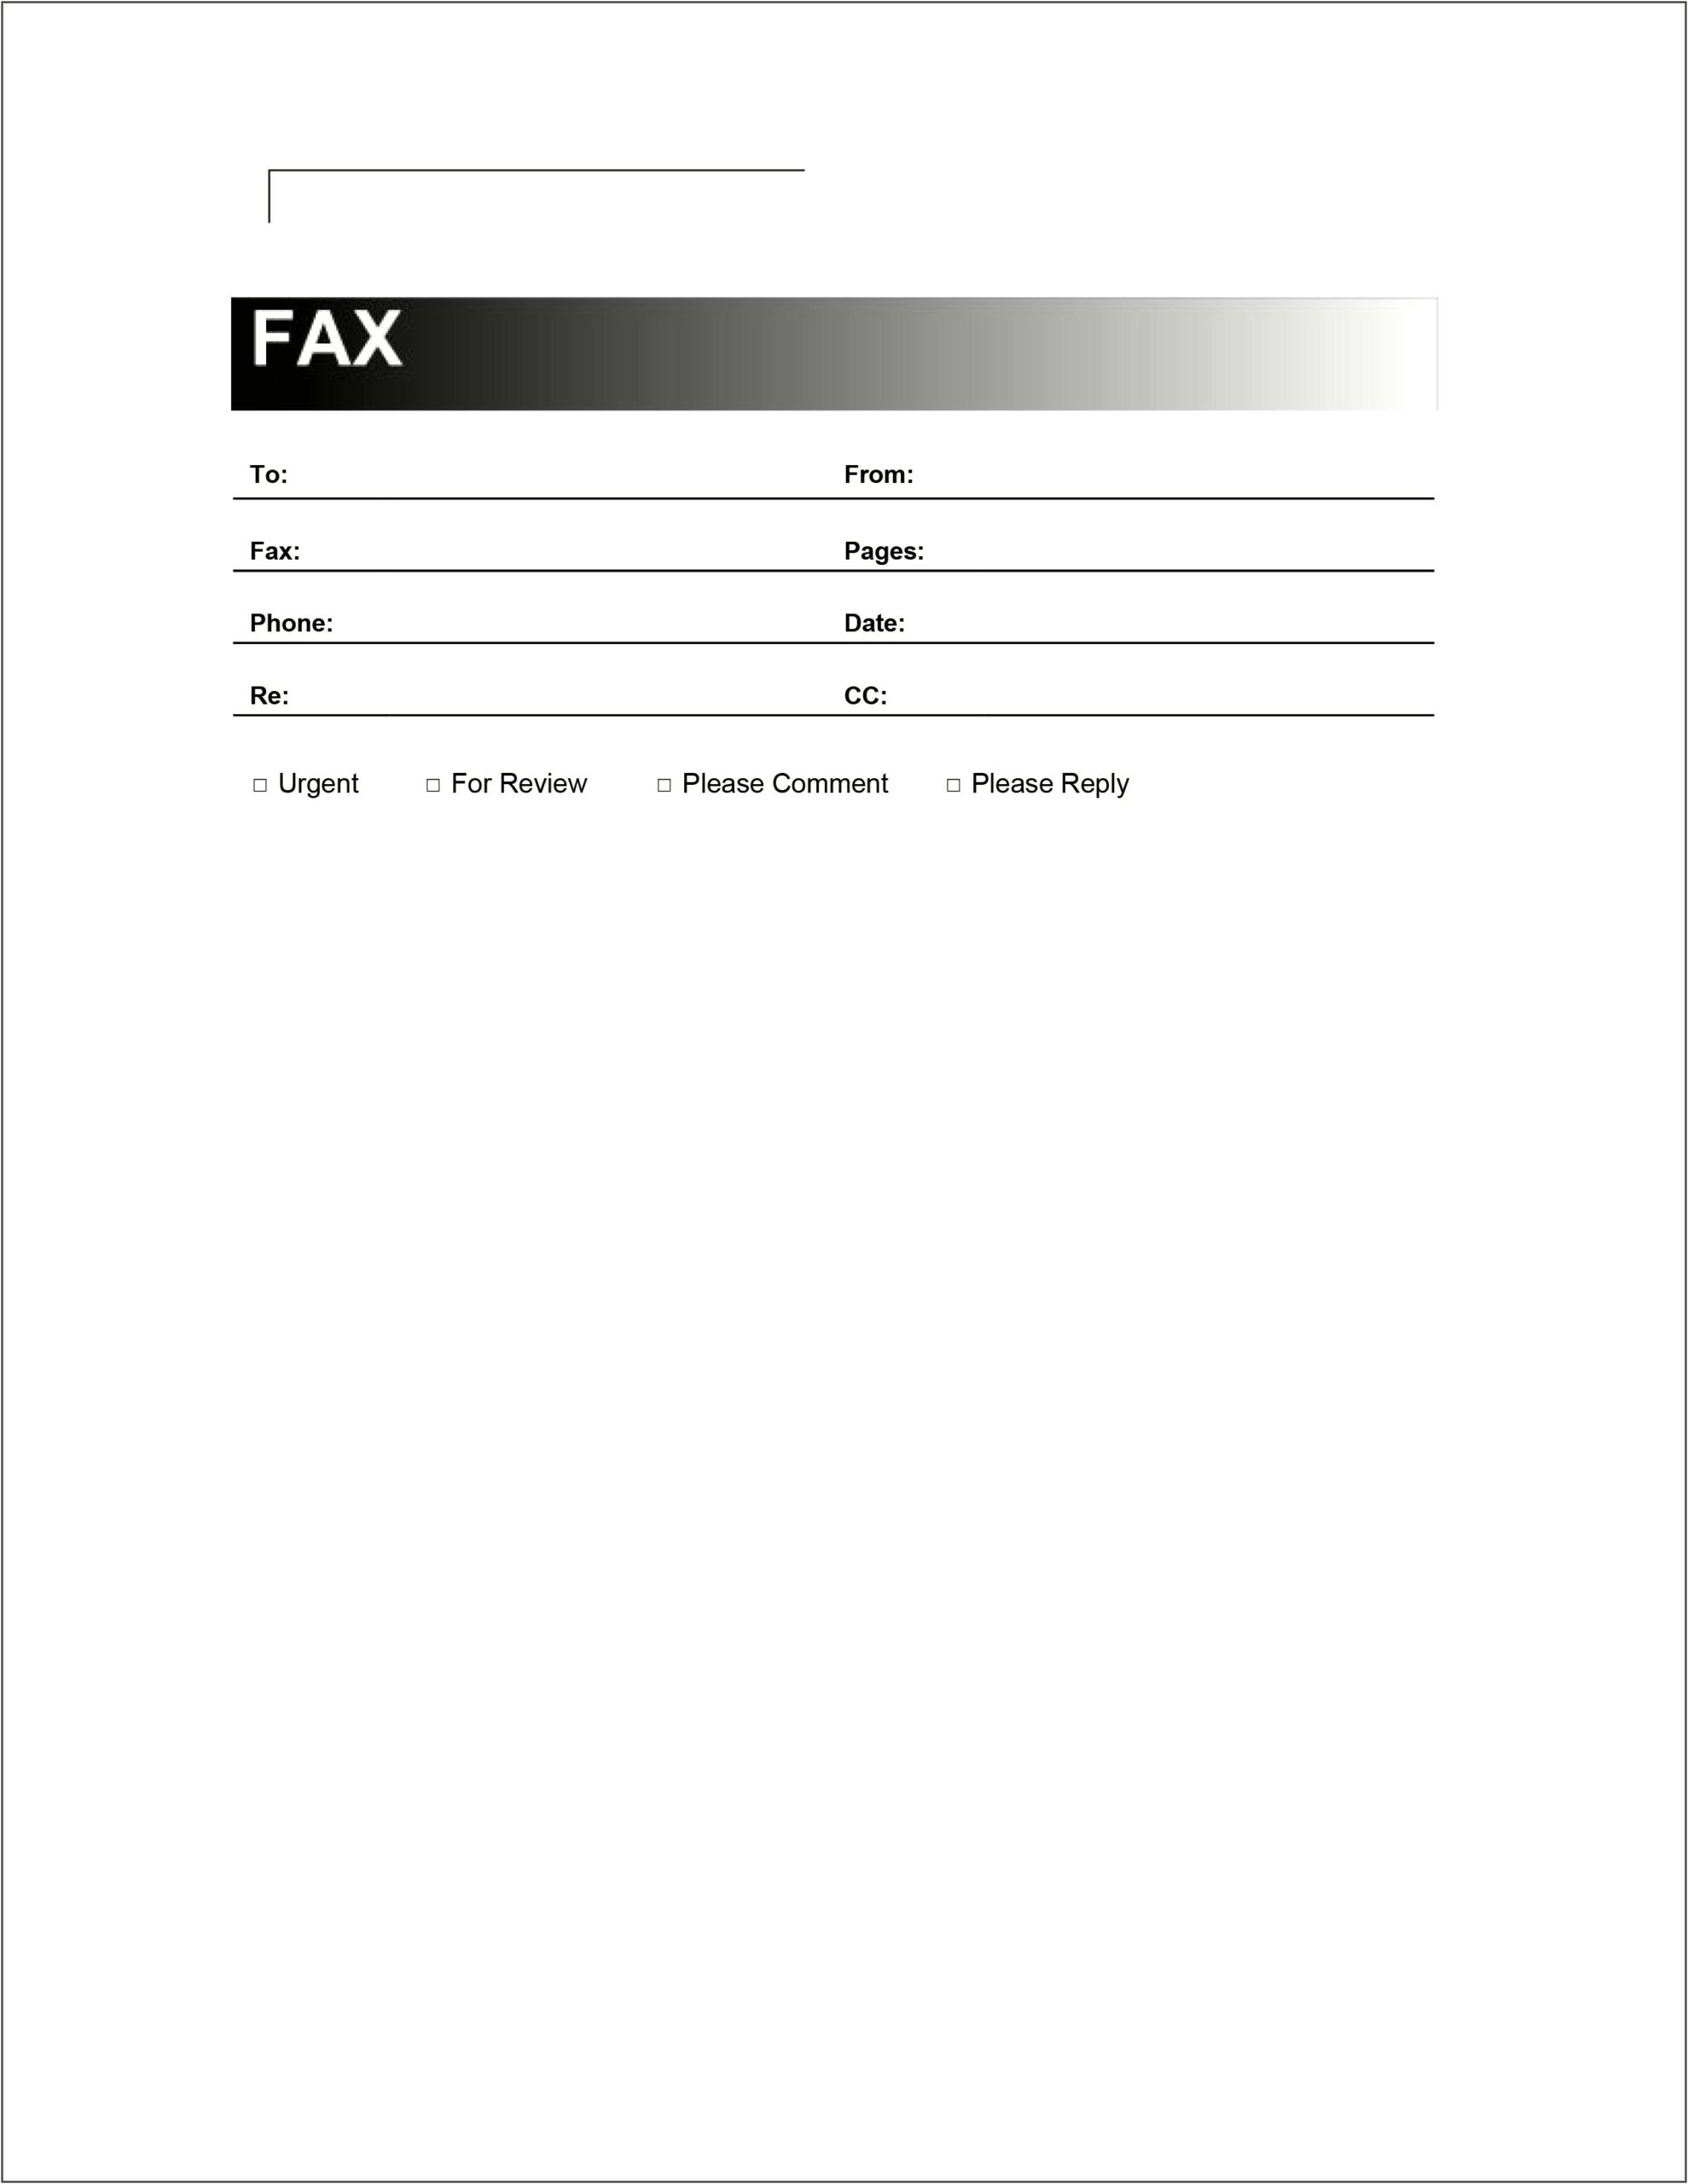 Fax Cover Sheet Template Word 2016